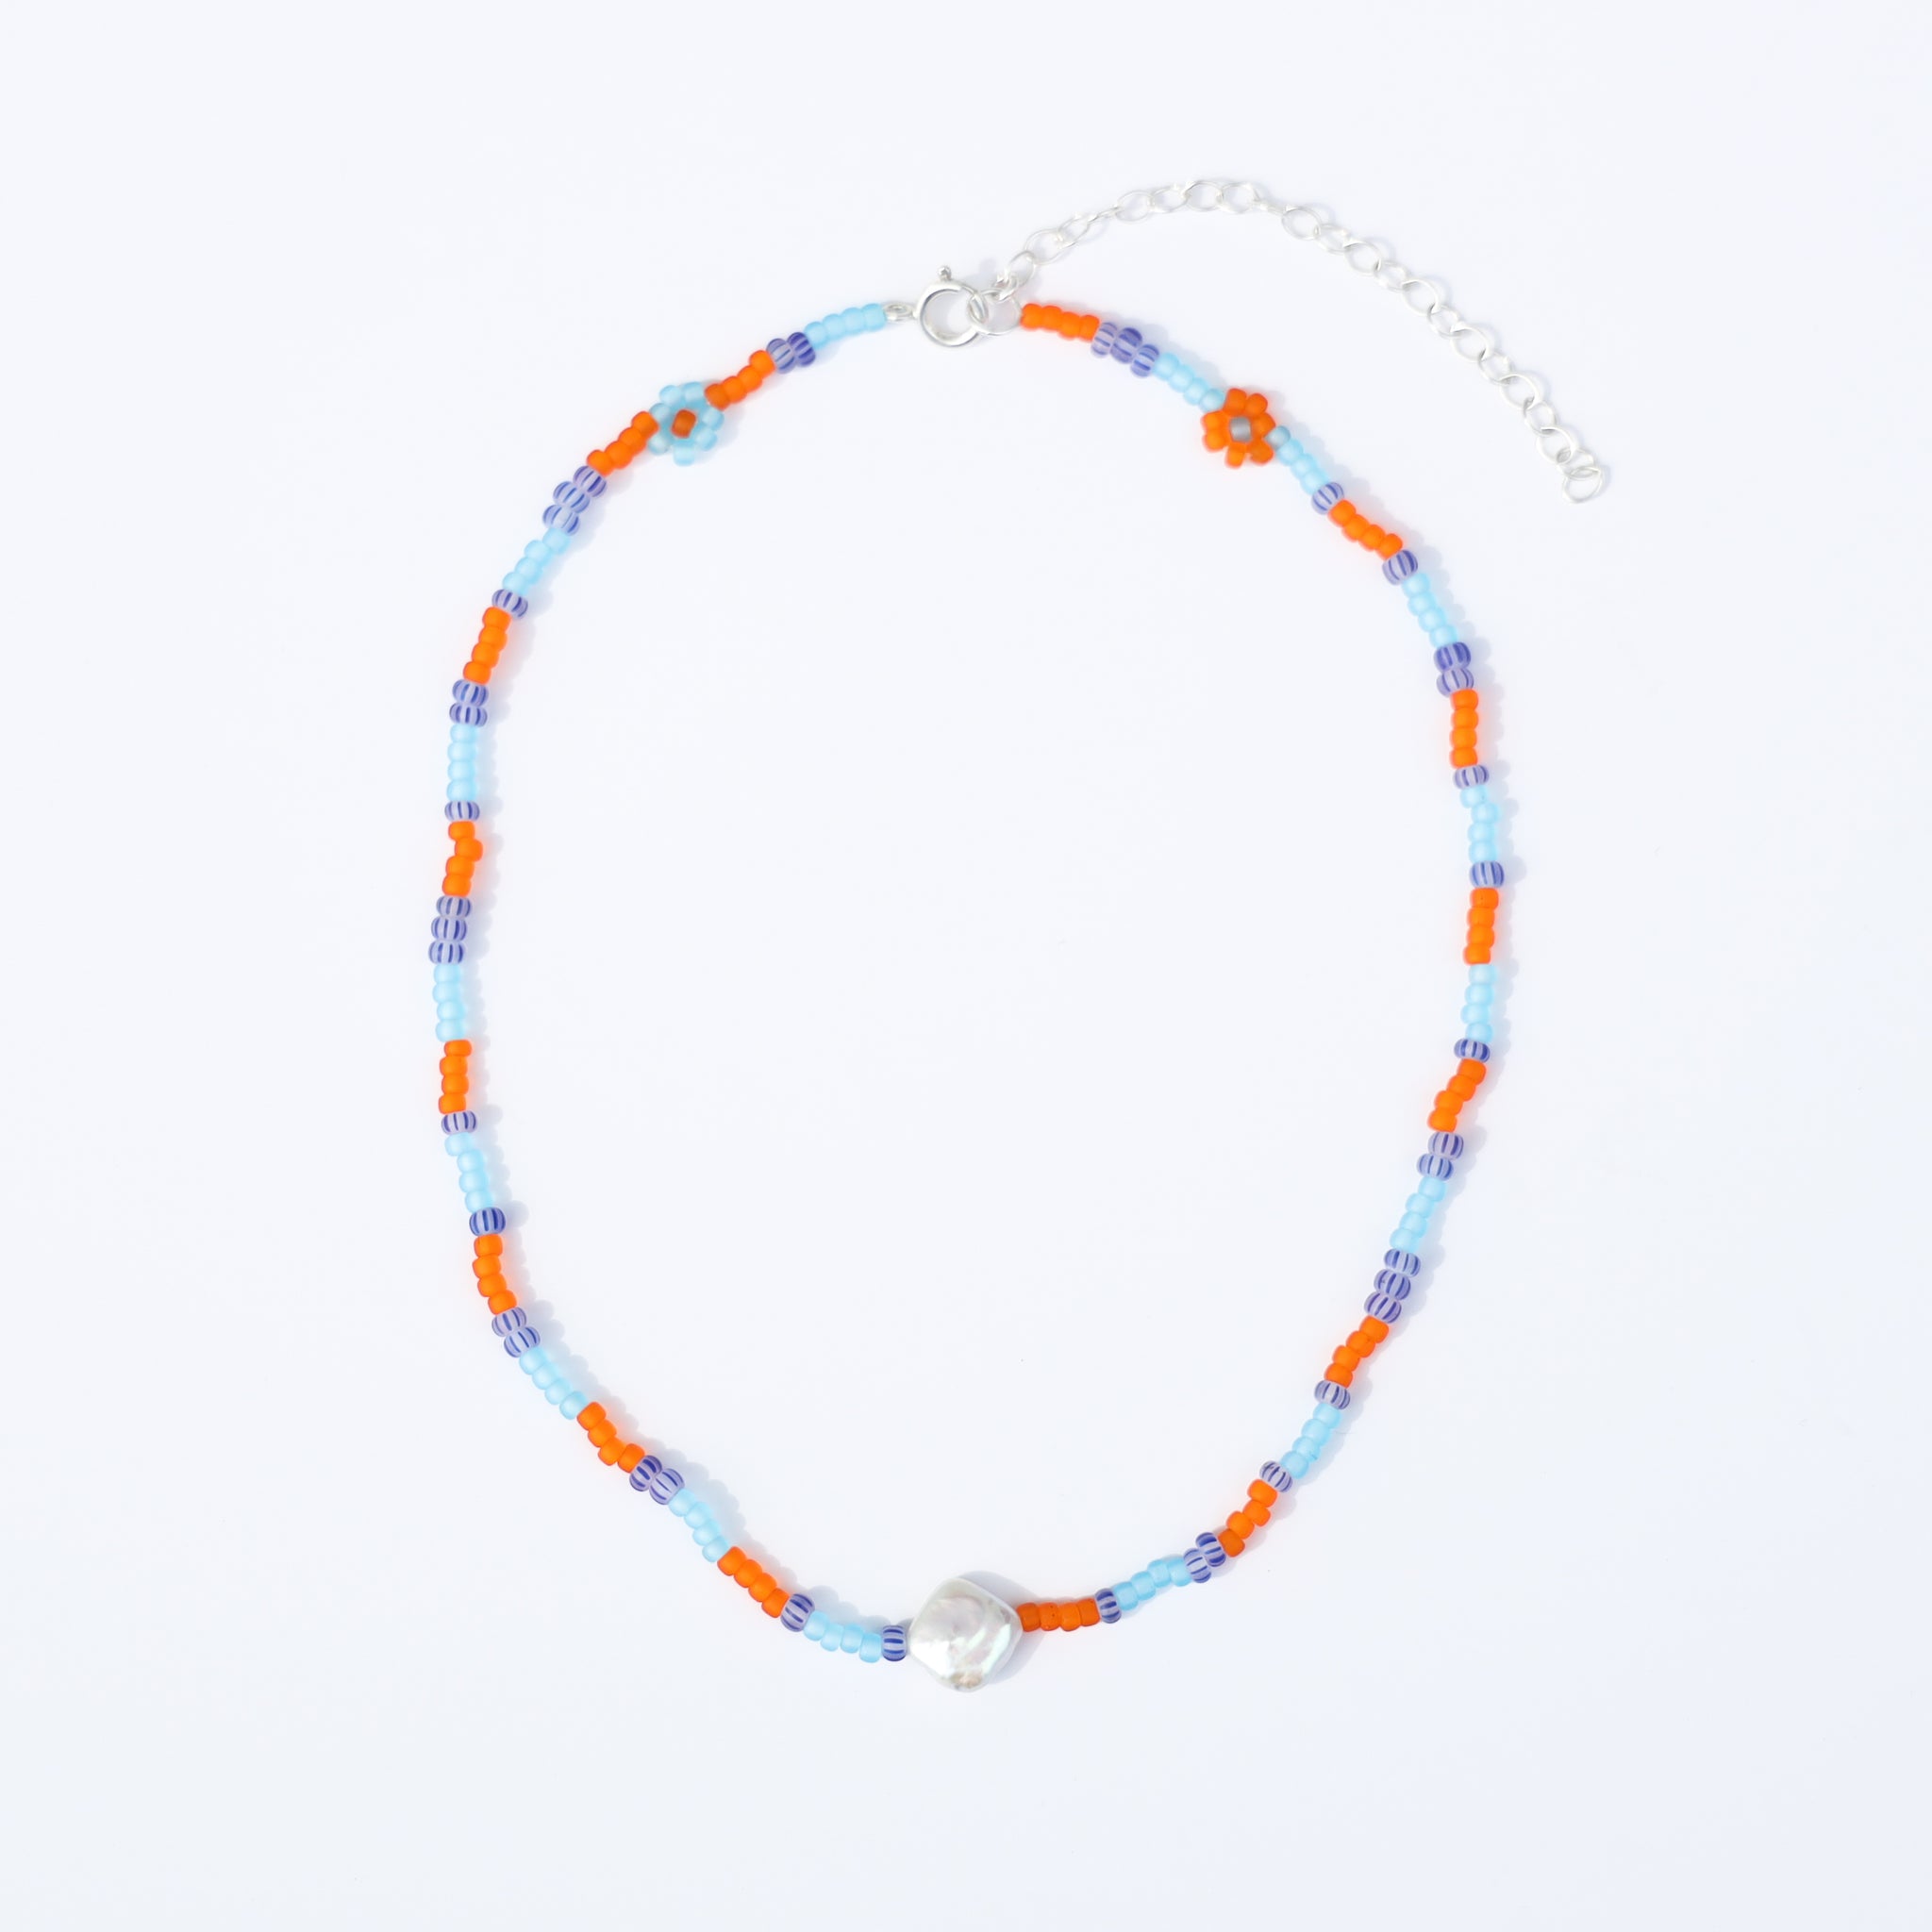 Blue Skies & Persimmons Hand-Beaded Necklace